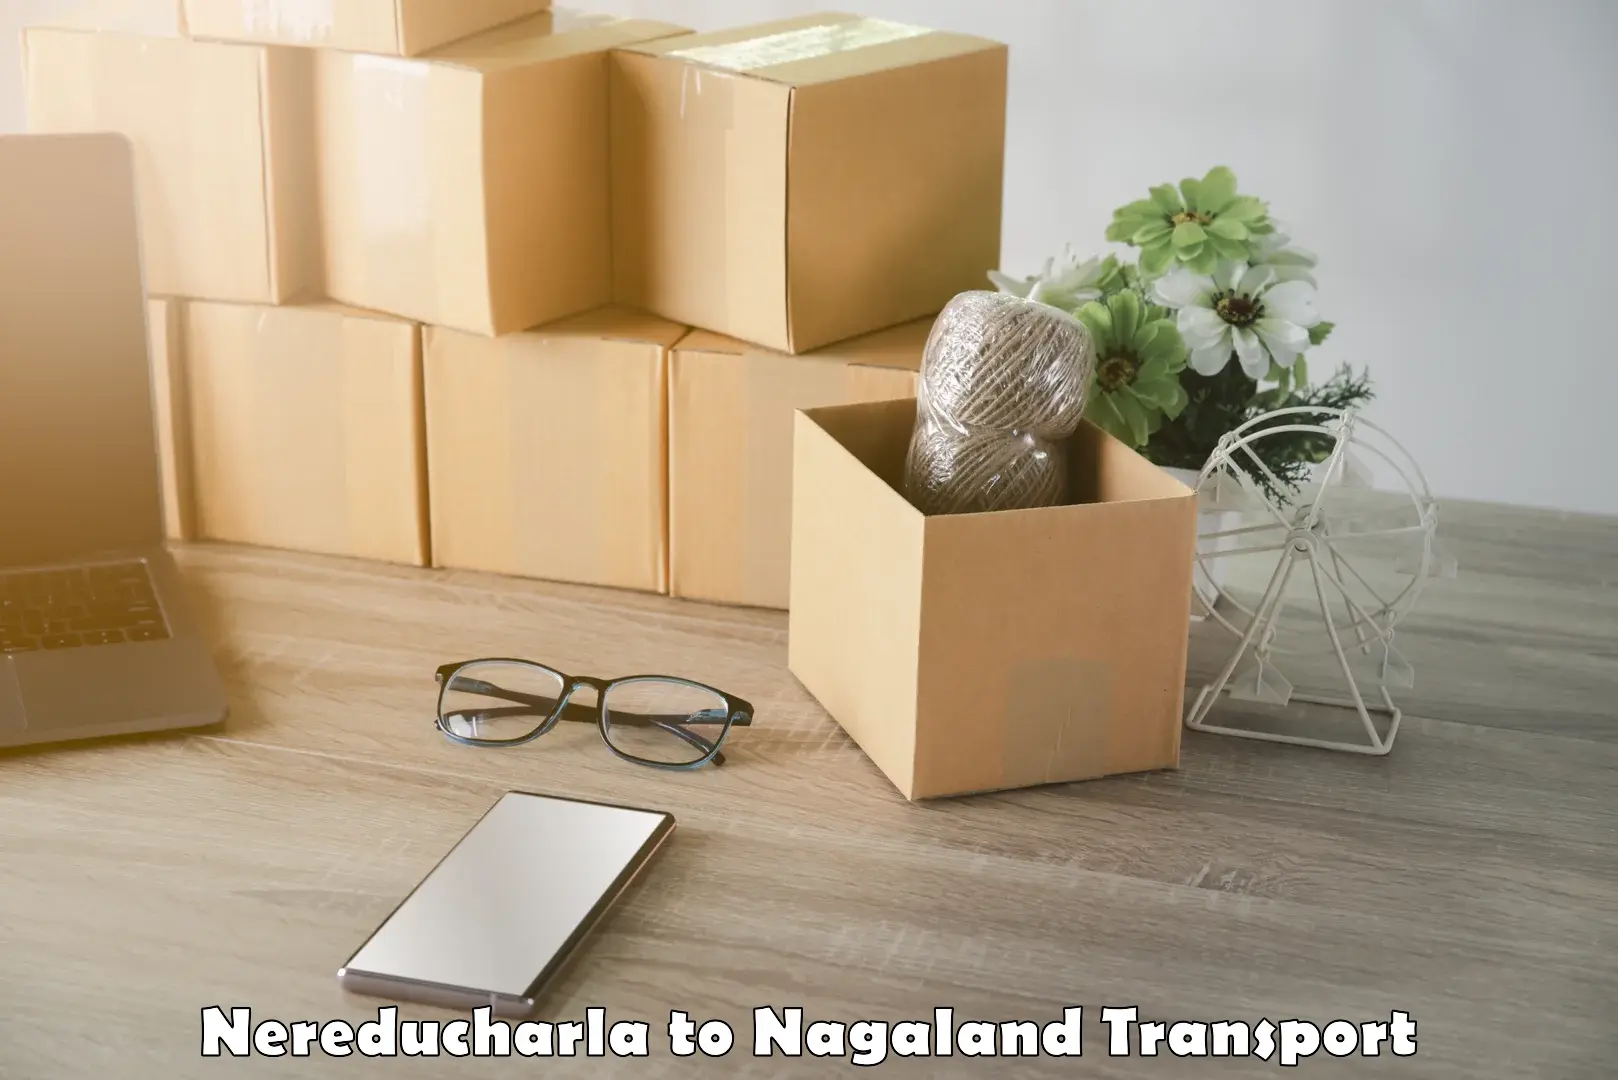 Container transportation services in Nereducharla to Mokokchung